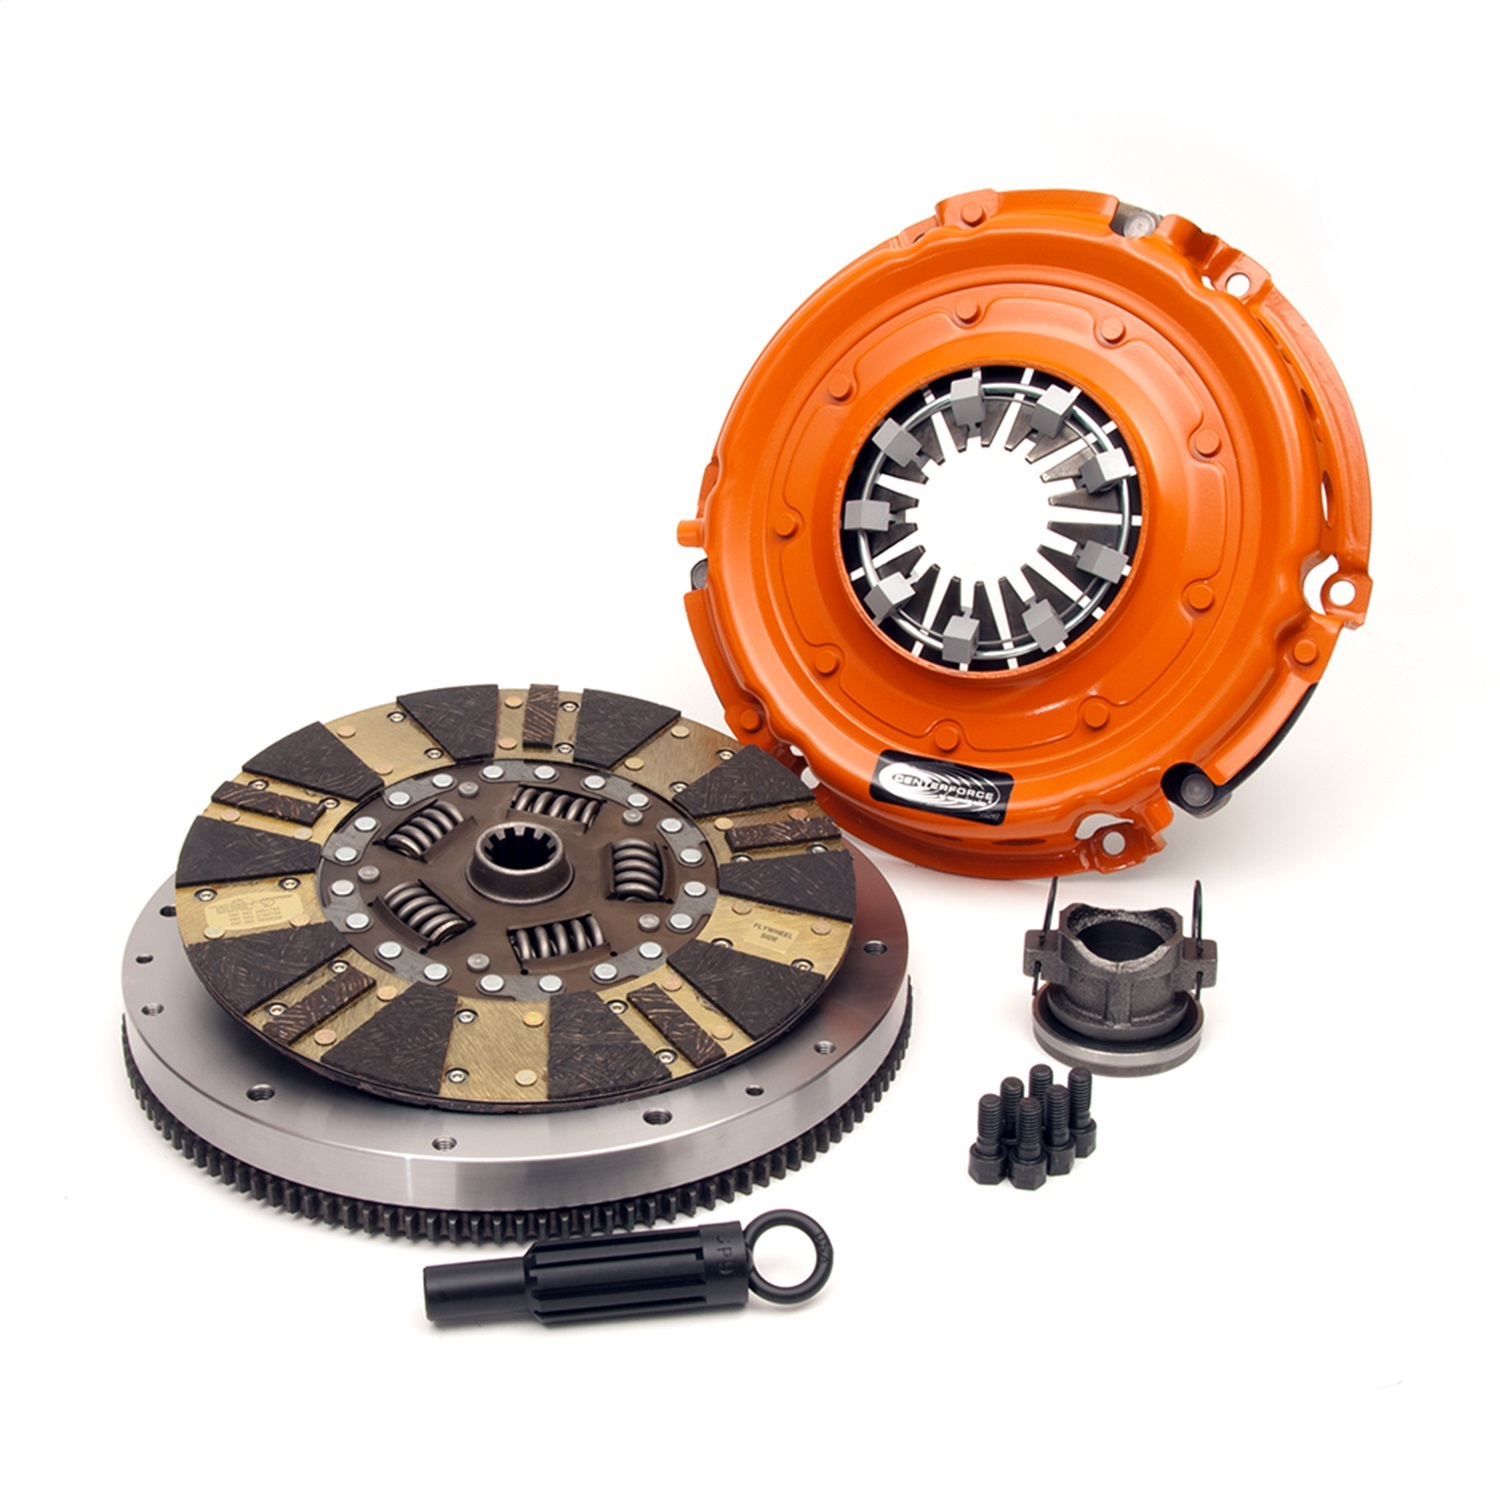 Centerforce Centerforce KDF379176 Dual Friction Clutch Pressure Plate And Disc Set